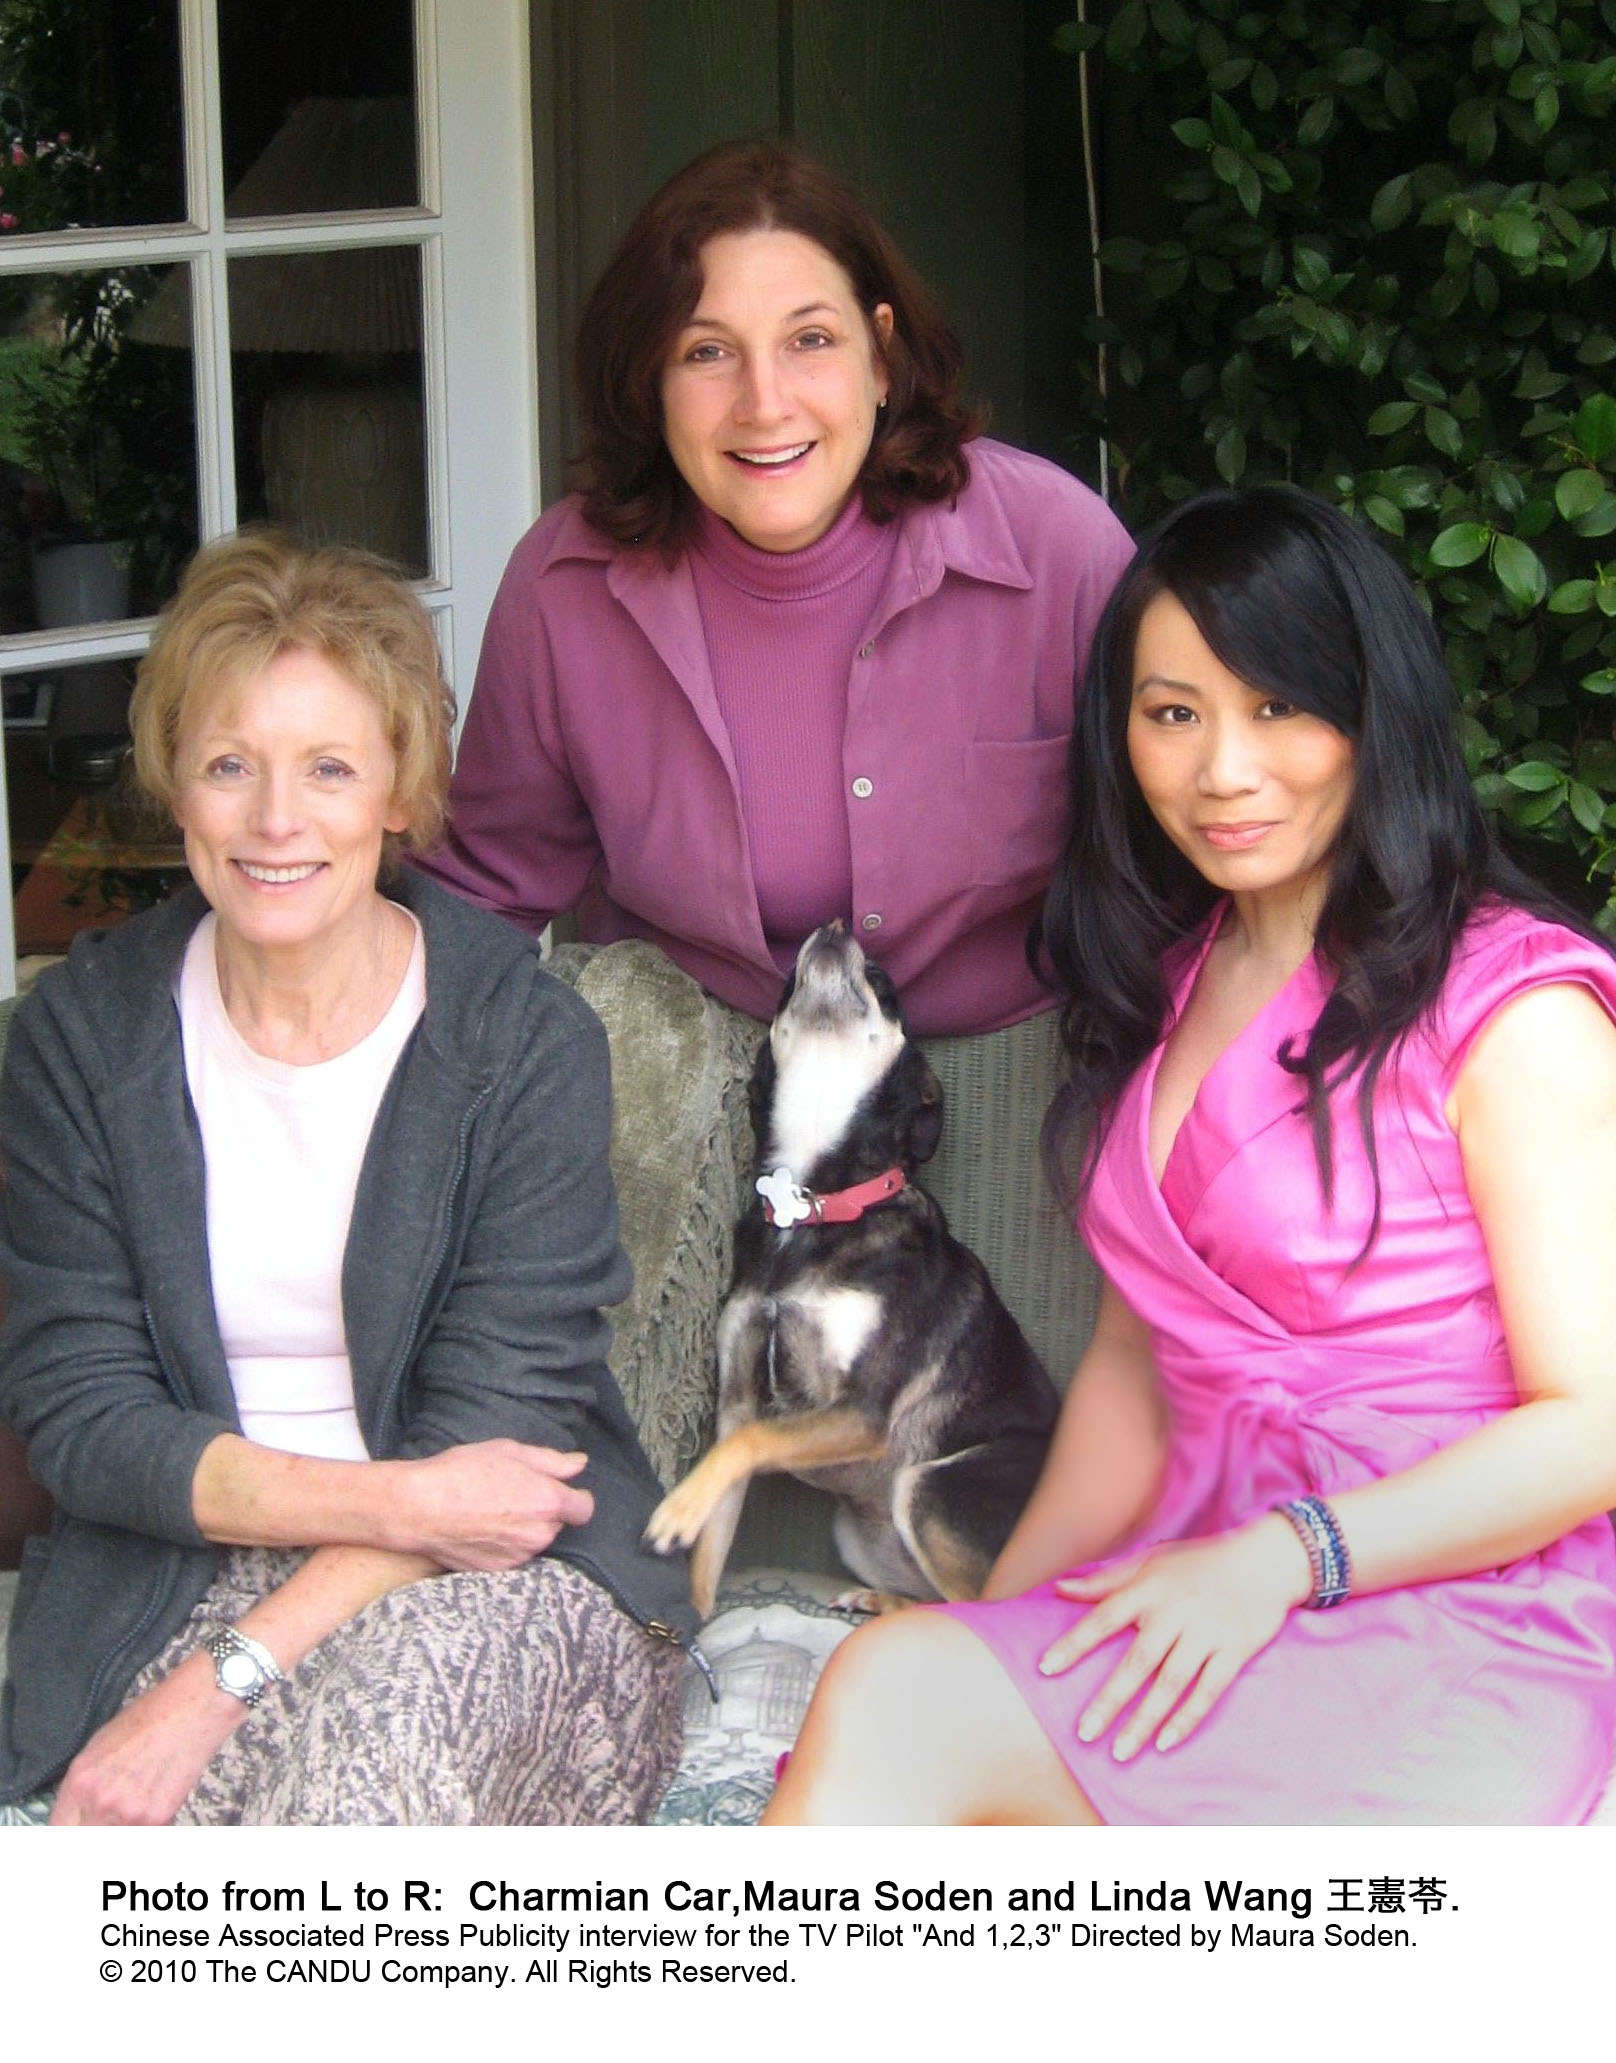 Photo from L to R: Charmian Carr (The Sound of Music) and Linda Wang.Chinese Associated Press Publicity interview for the TV Pilot 